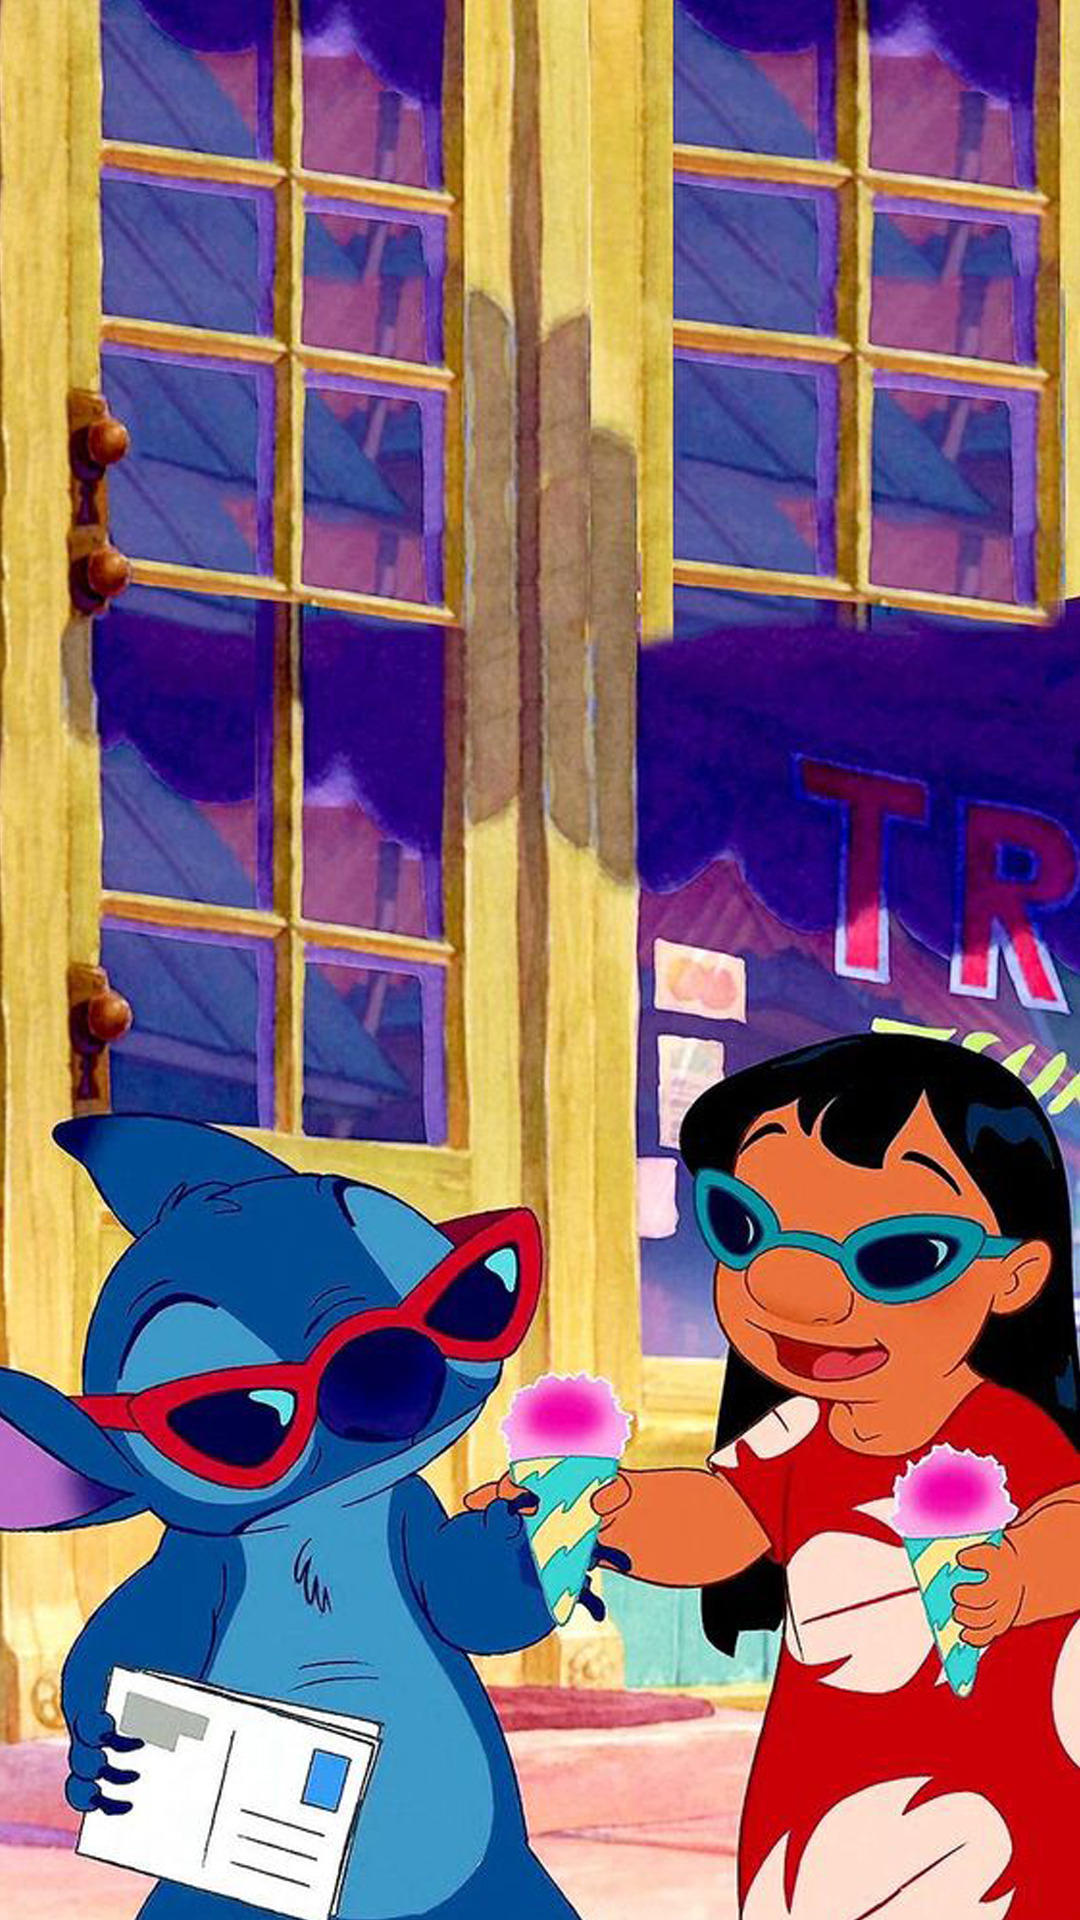 Lilo And Stitch Wallpaper Aesthetic 2943402 Hd Wallpaper Backgrounds Download Check out inspiring examples of lilo_and_stitch artwork on deviantart, and get inspired by our community of talented artists. lilo and stitch wallpaper aesthetic